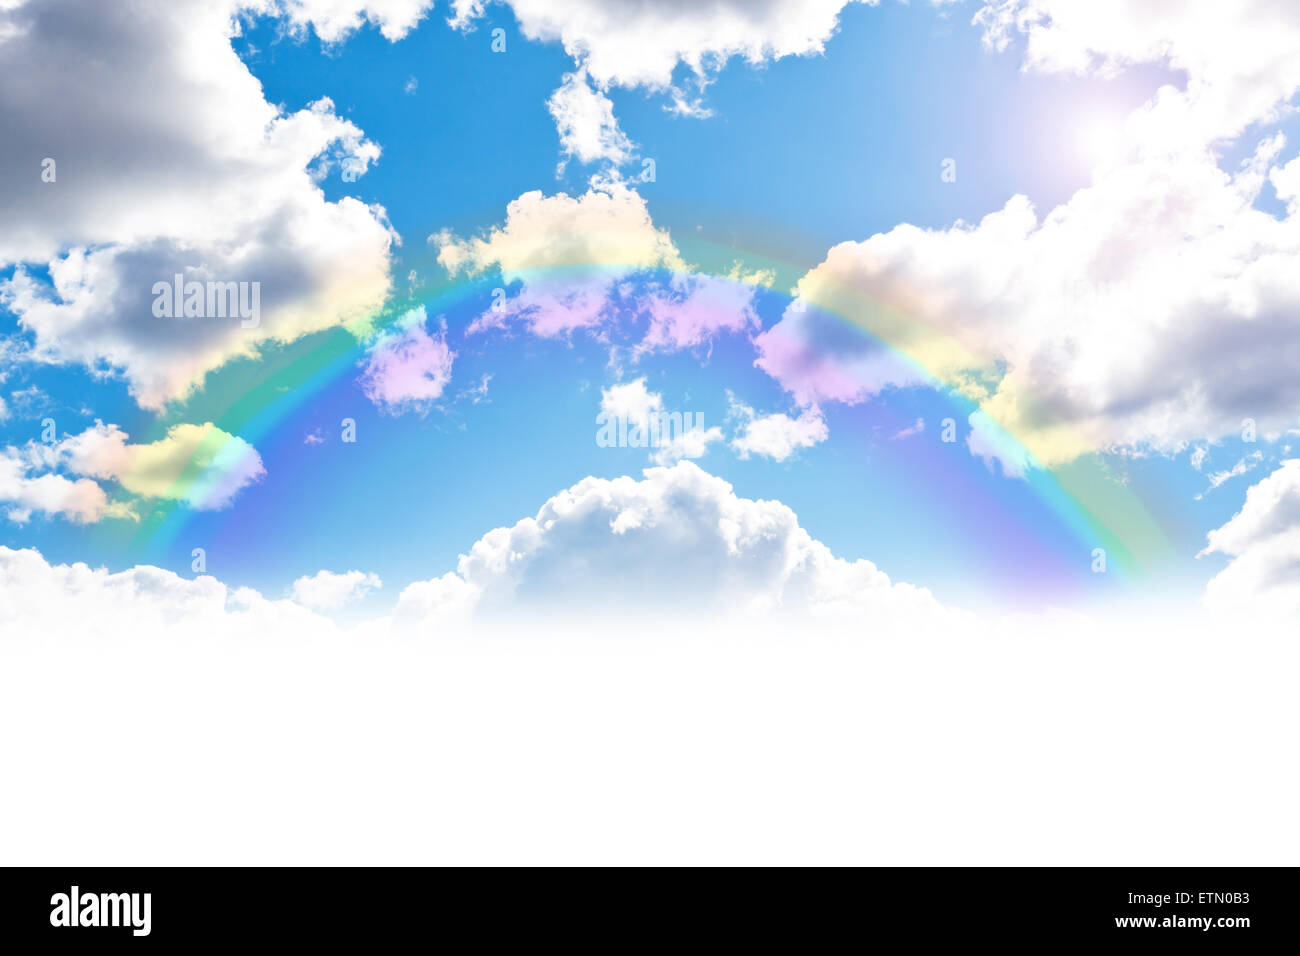 Blue cloudly sky with rainbow background and free space for your text Stock Photo